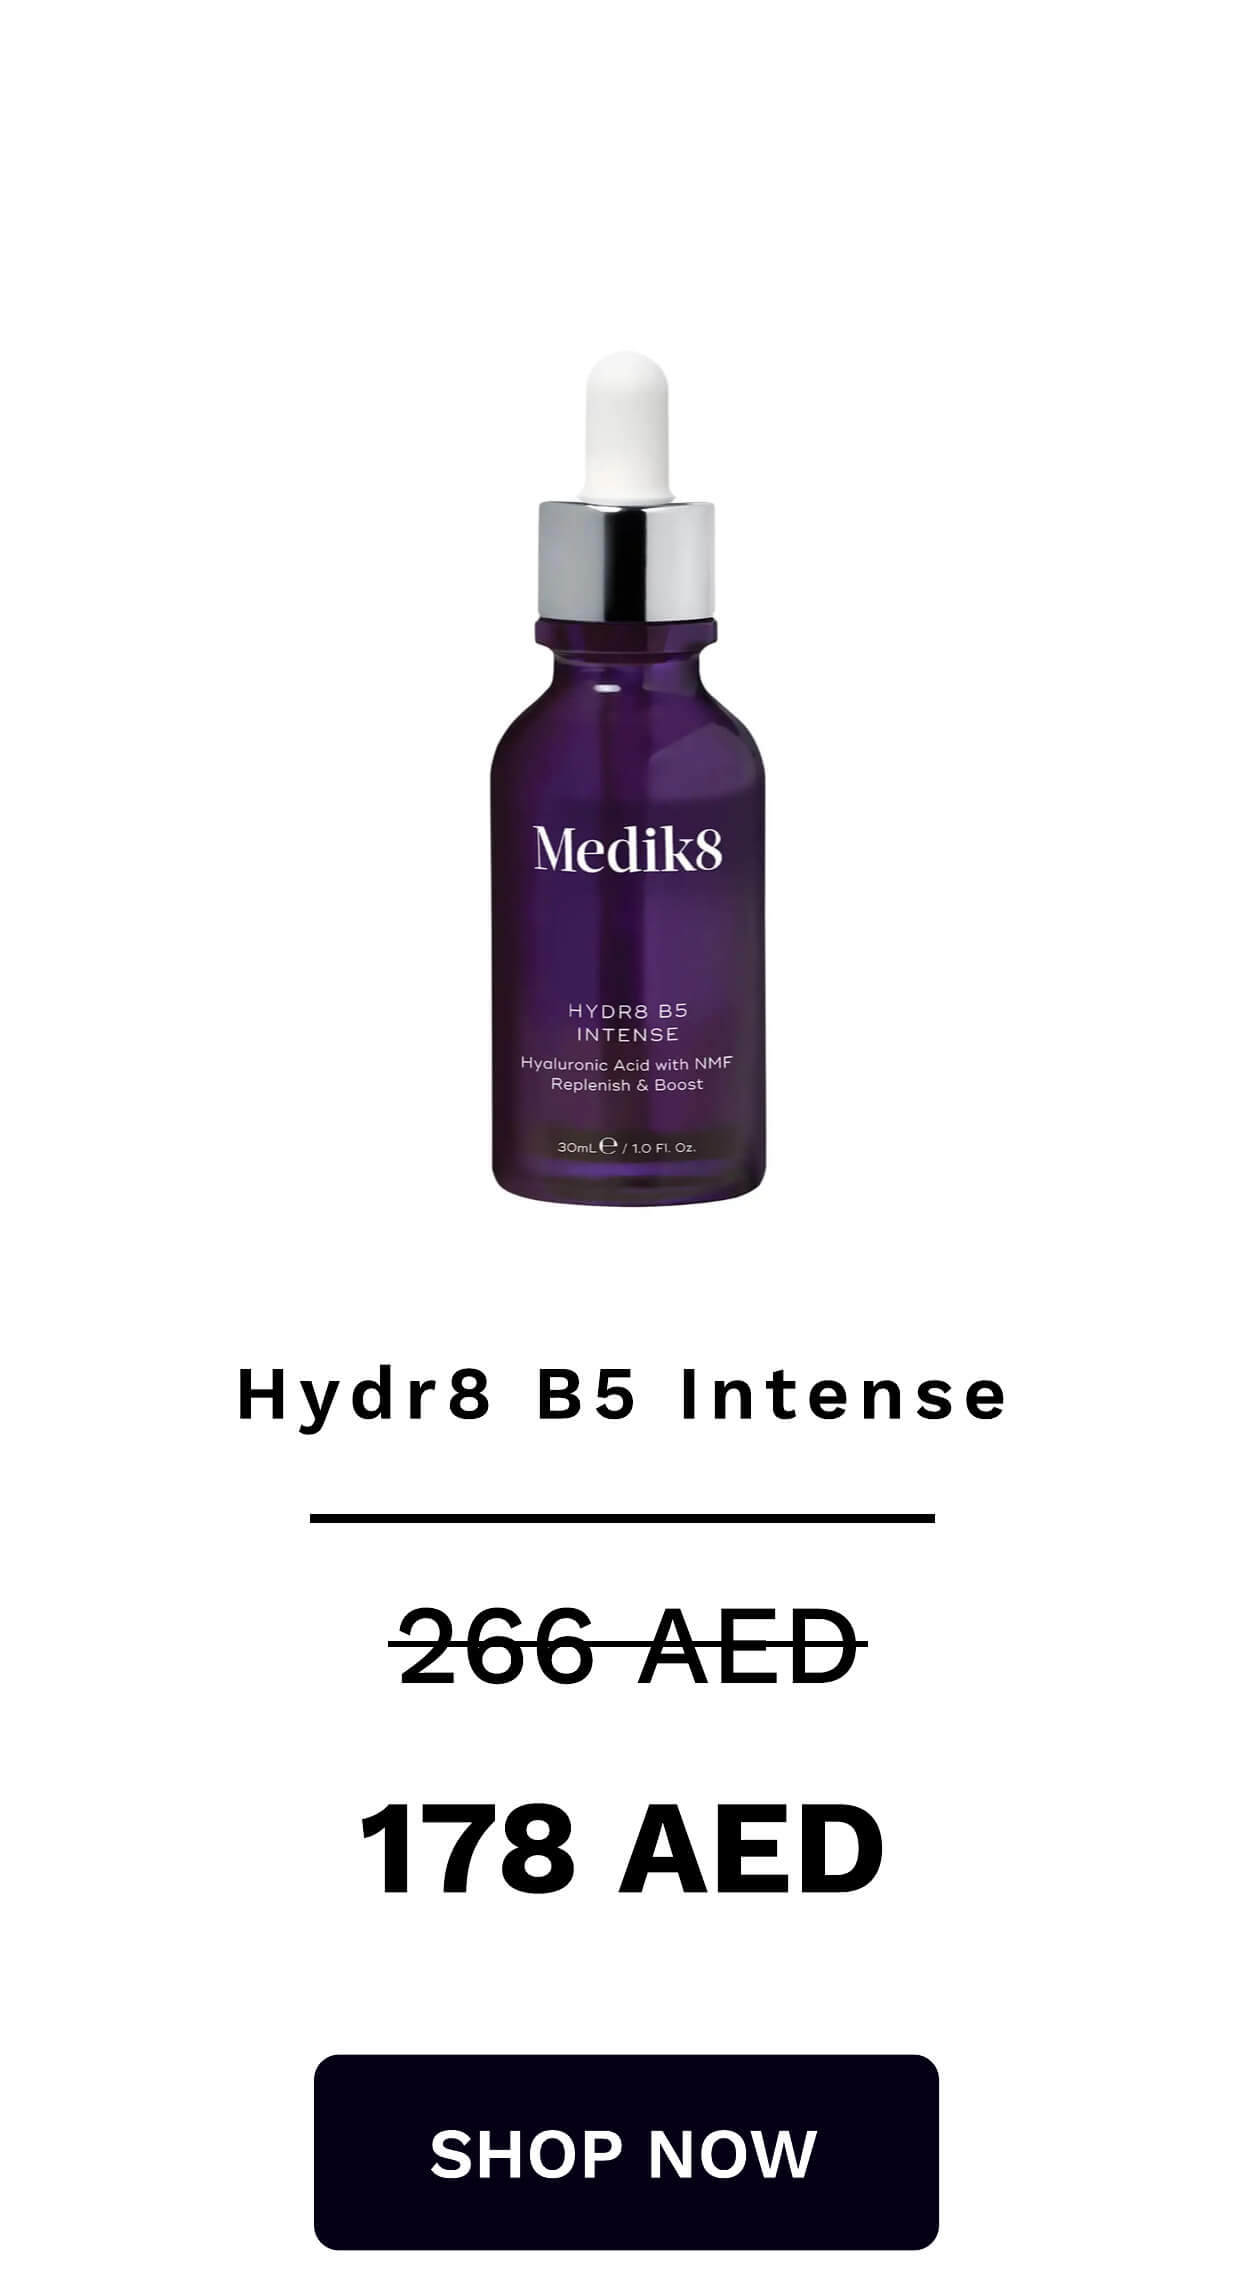  Hydr8 B5 Intense 266-AED 178 AED SHOP NOW 